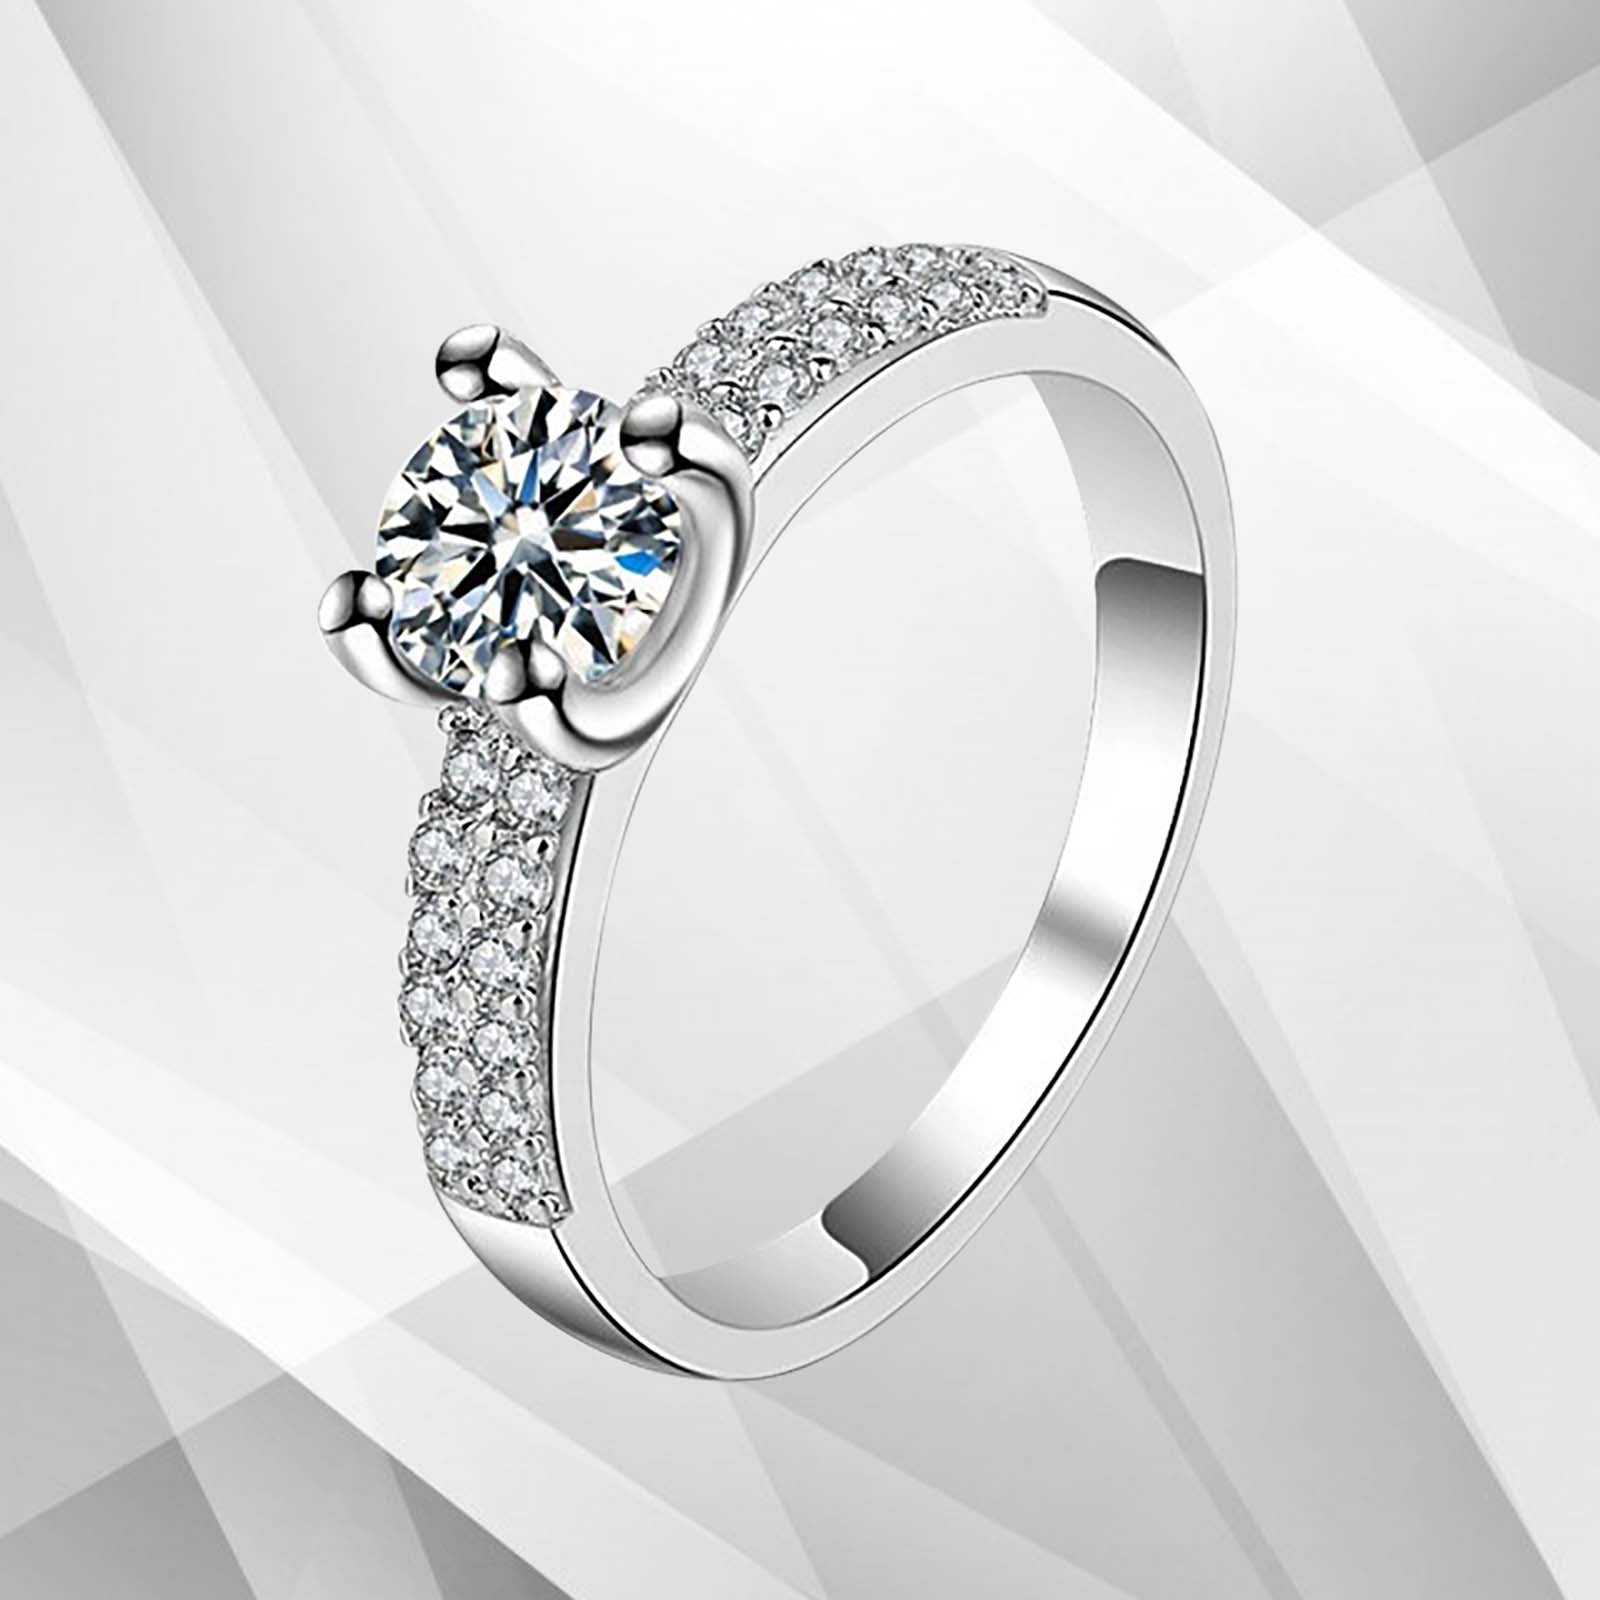 Contemporary Women's Engagement Ring - 2.50Ct CZ Diamond, White Gold Plated Brass, Hypoallergenic, Free Shipping Bijou Her